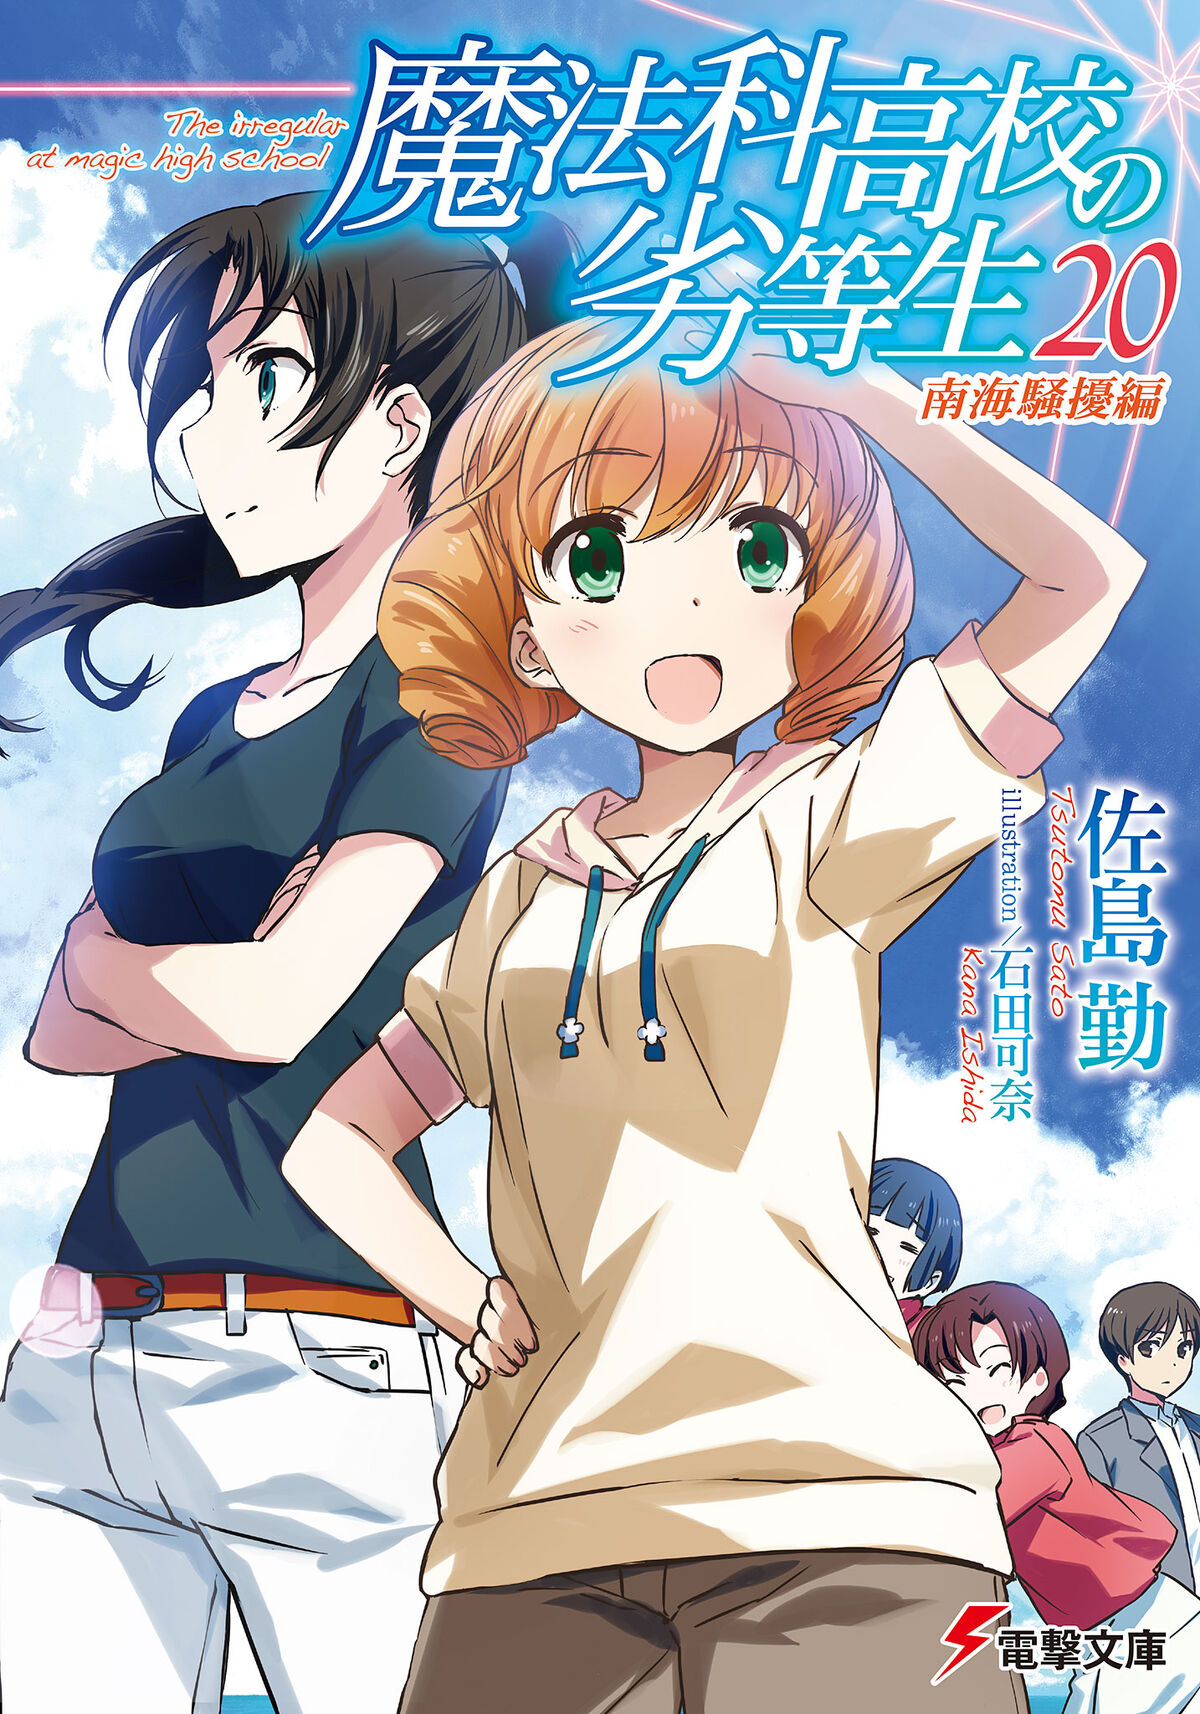 Sinopsis Light Novel Classroom Of The Elite 2nd Year Vol. 3 Chapter 2-4 